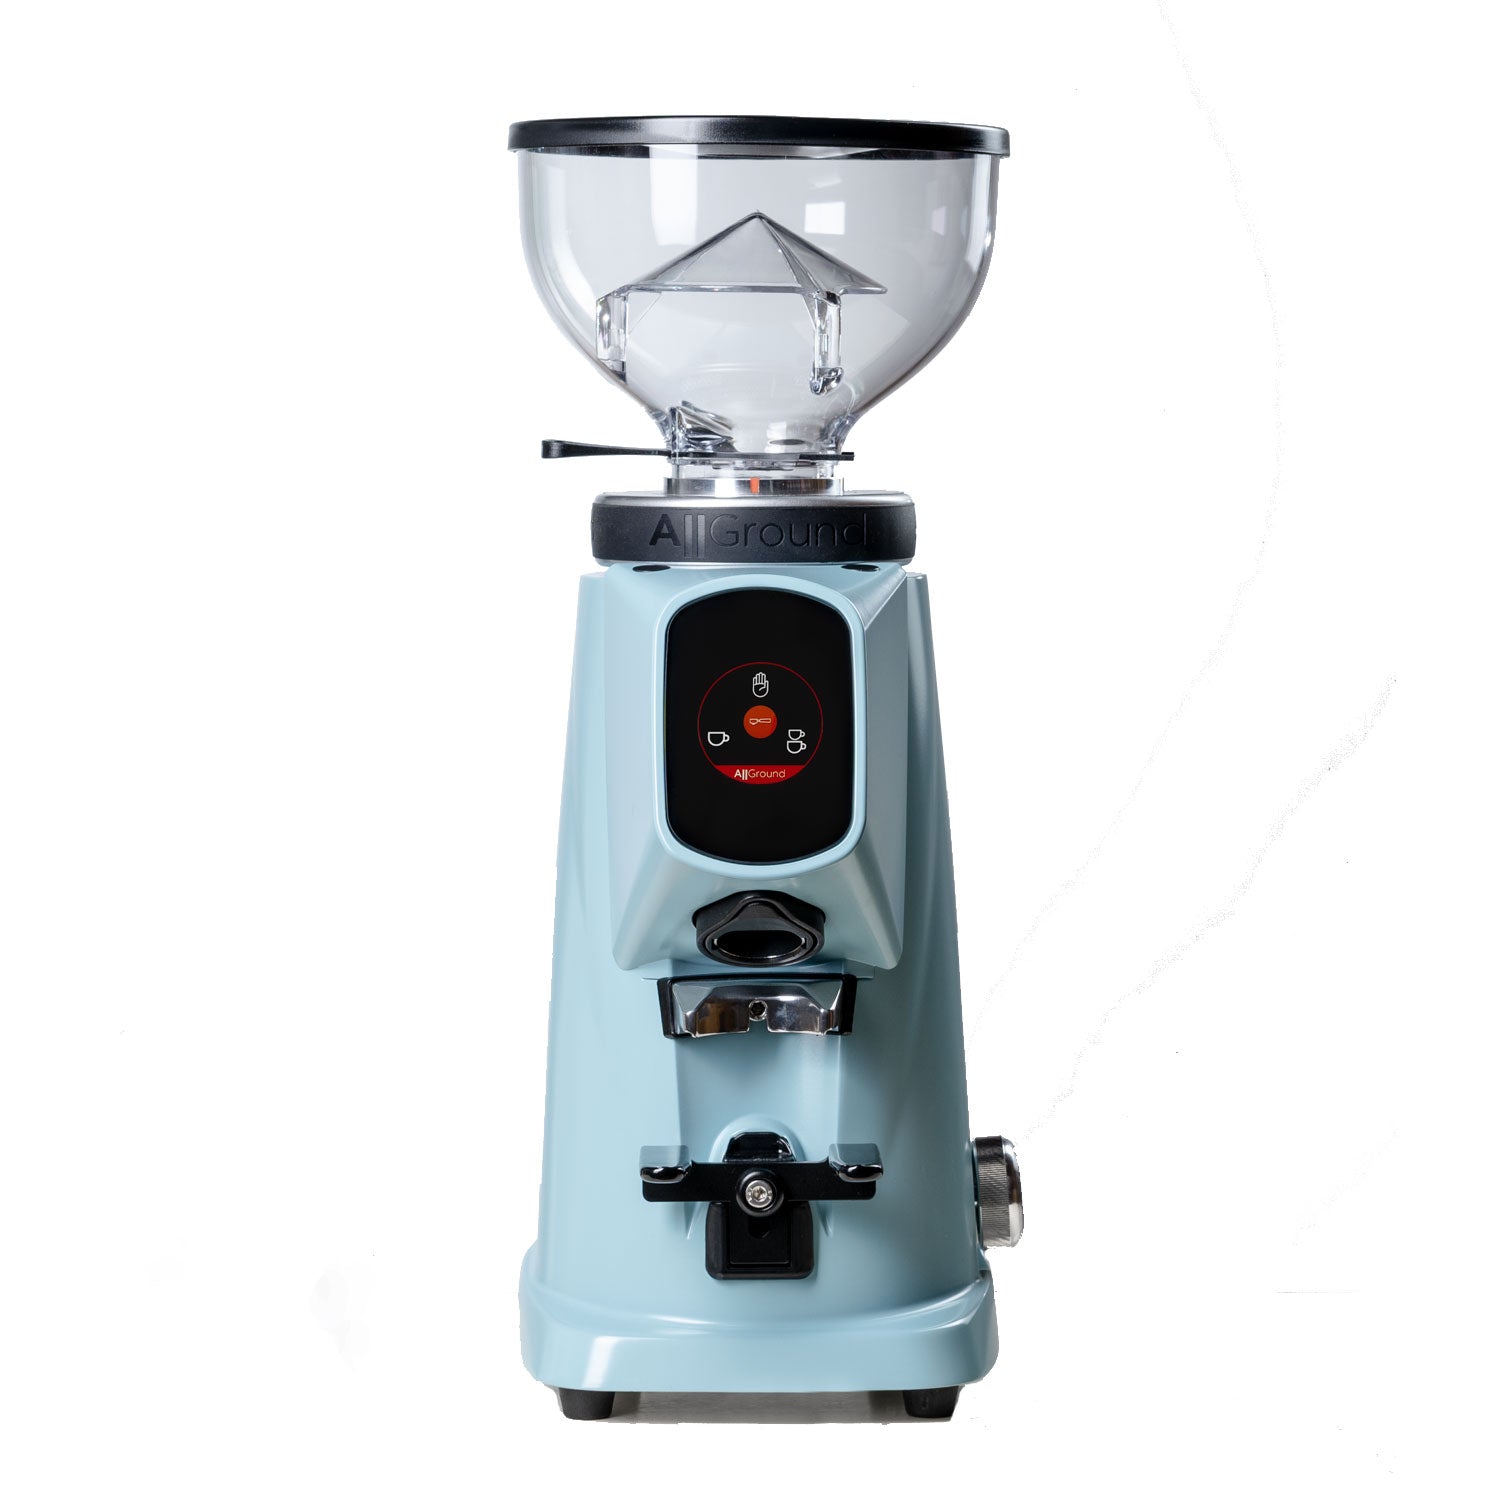 USED BUNN PRECISION COFFEE GRINDER - Delray Food Service Equipment &  Reconditioning Inc.